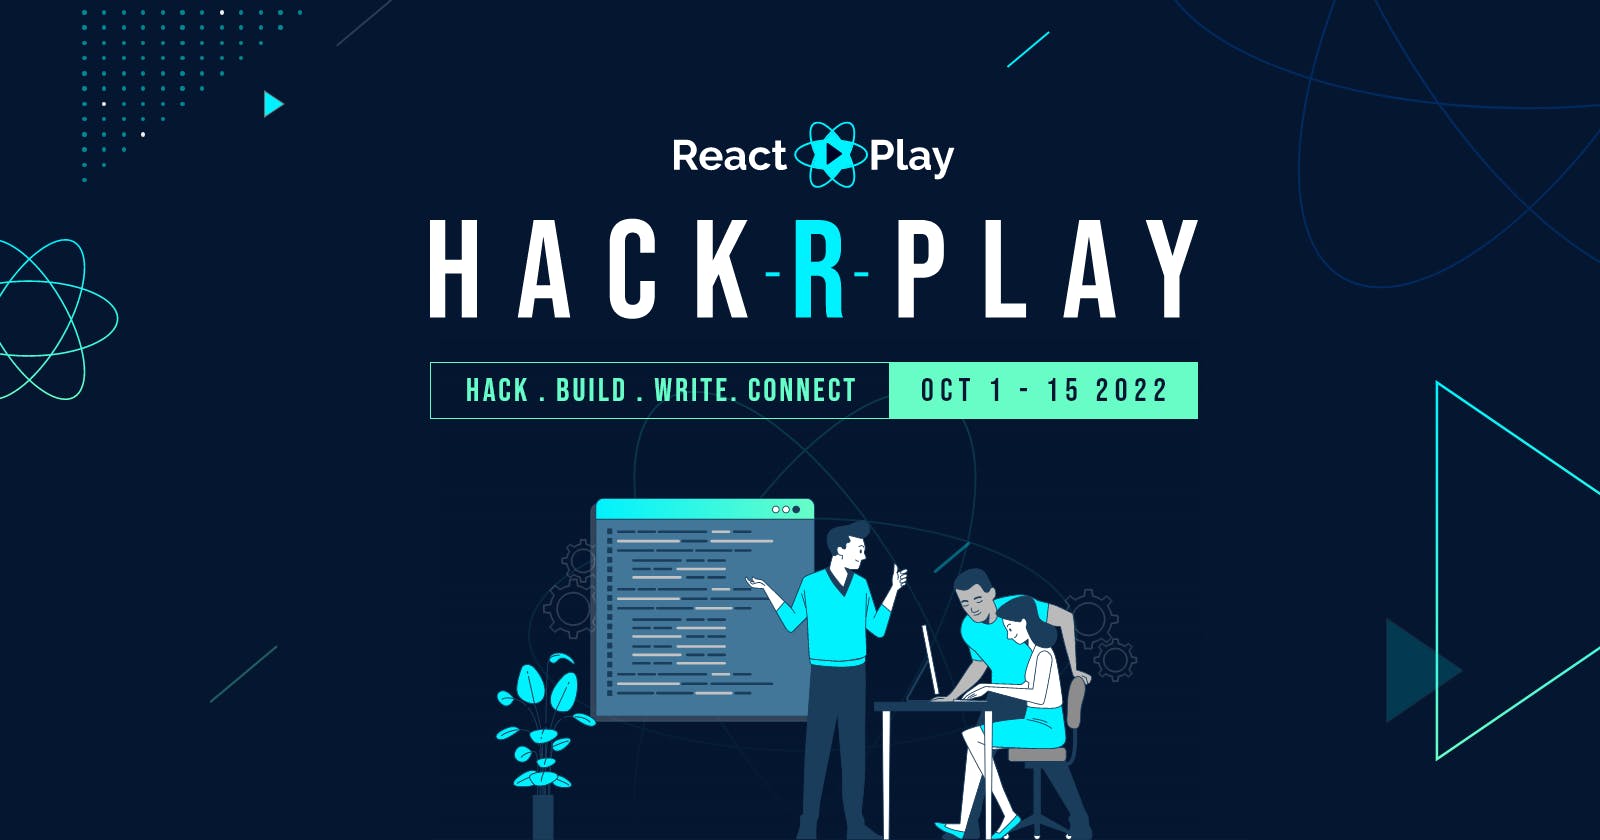 Announcing Hack-R-Play: Hackathon to build, write, and connect